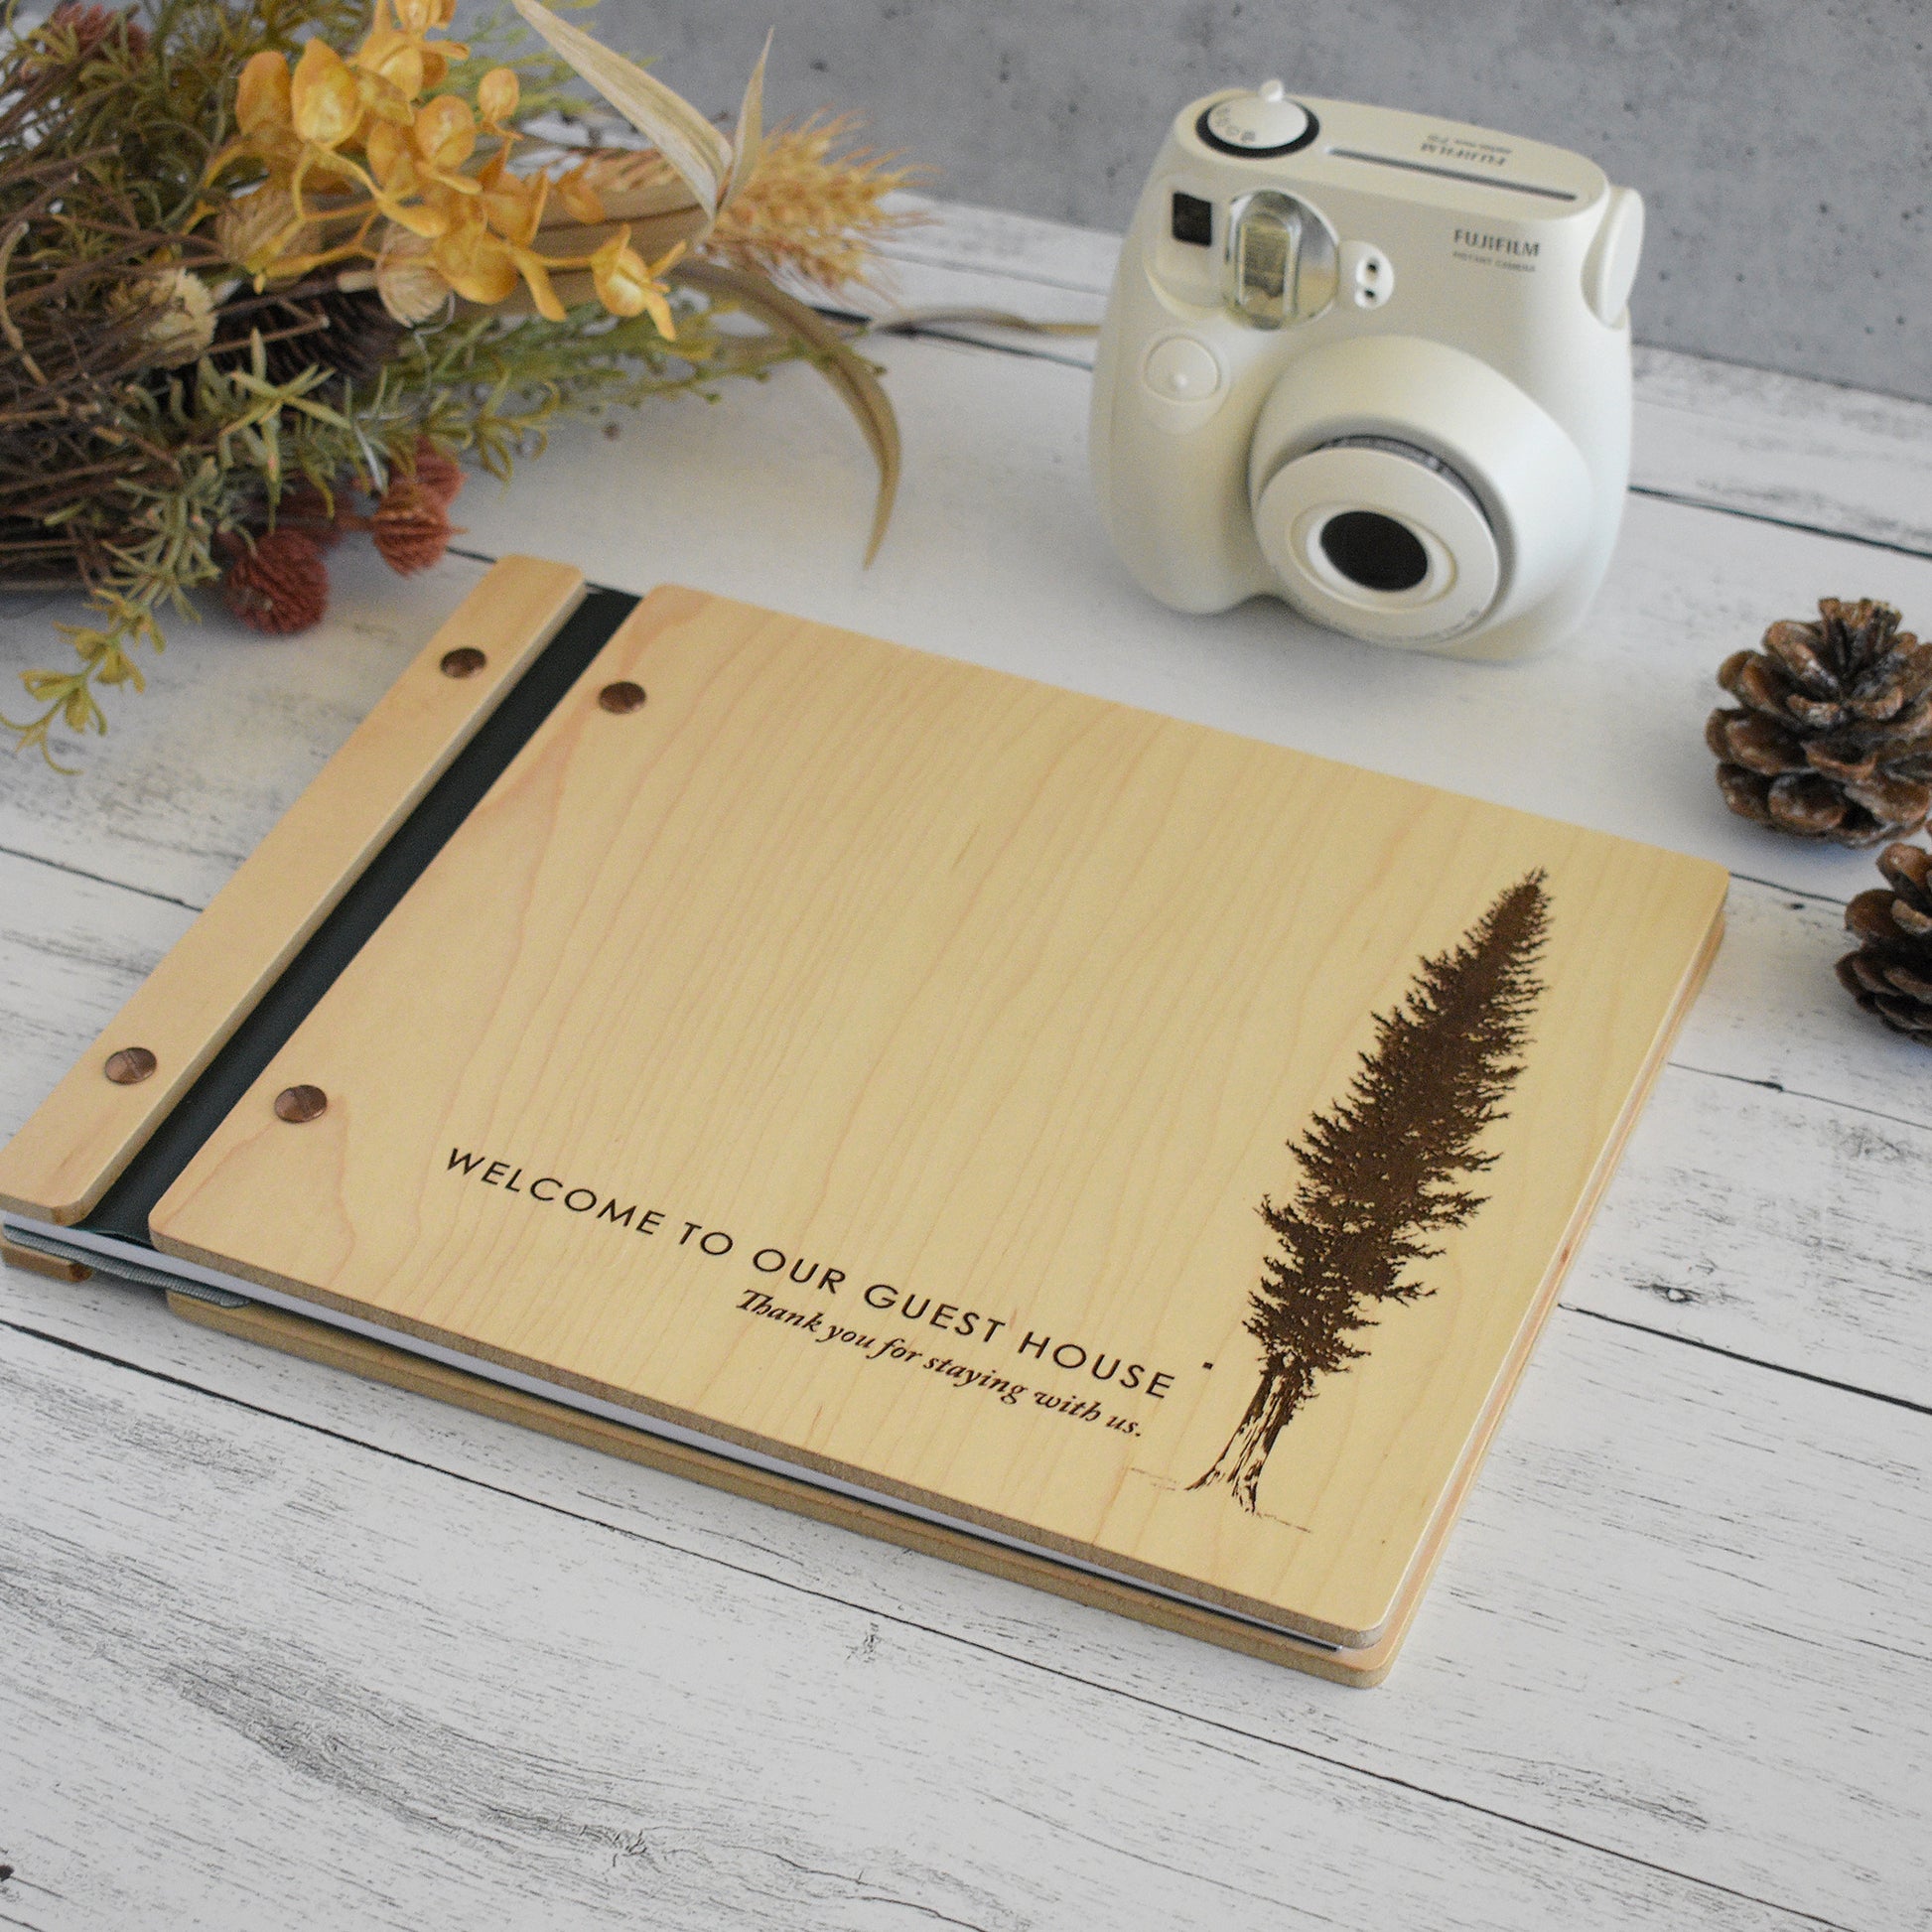 Guest Book: Sign In Visitor Log Book For Vacation Home, Rental House, Airbnb, Bed And Breakfast Memory Book, Lake Home Rental Logbook